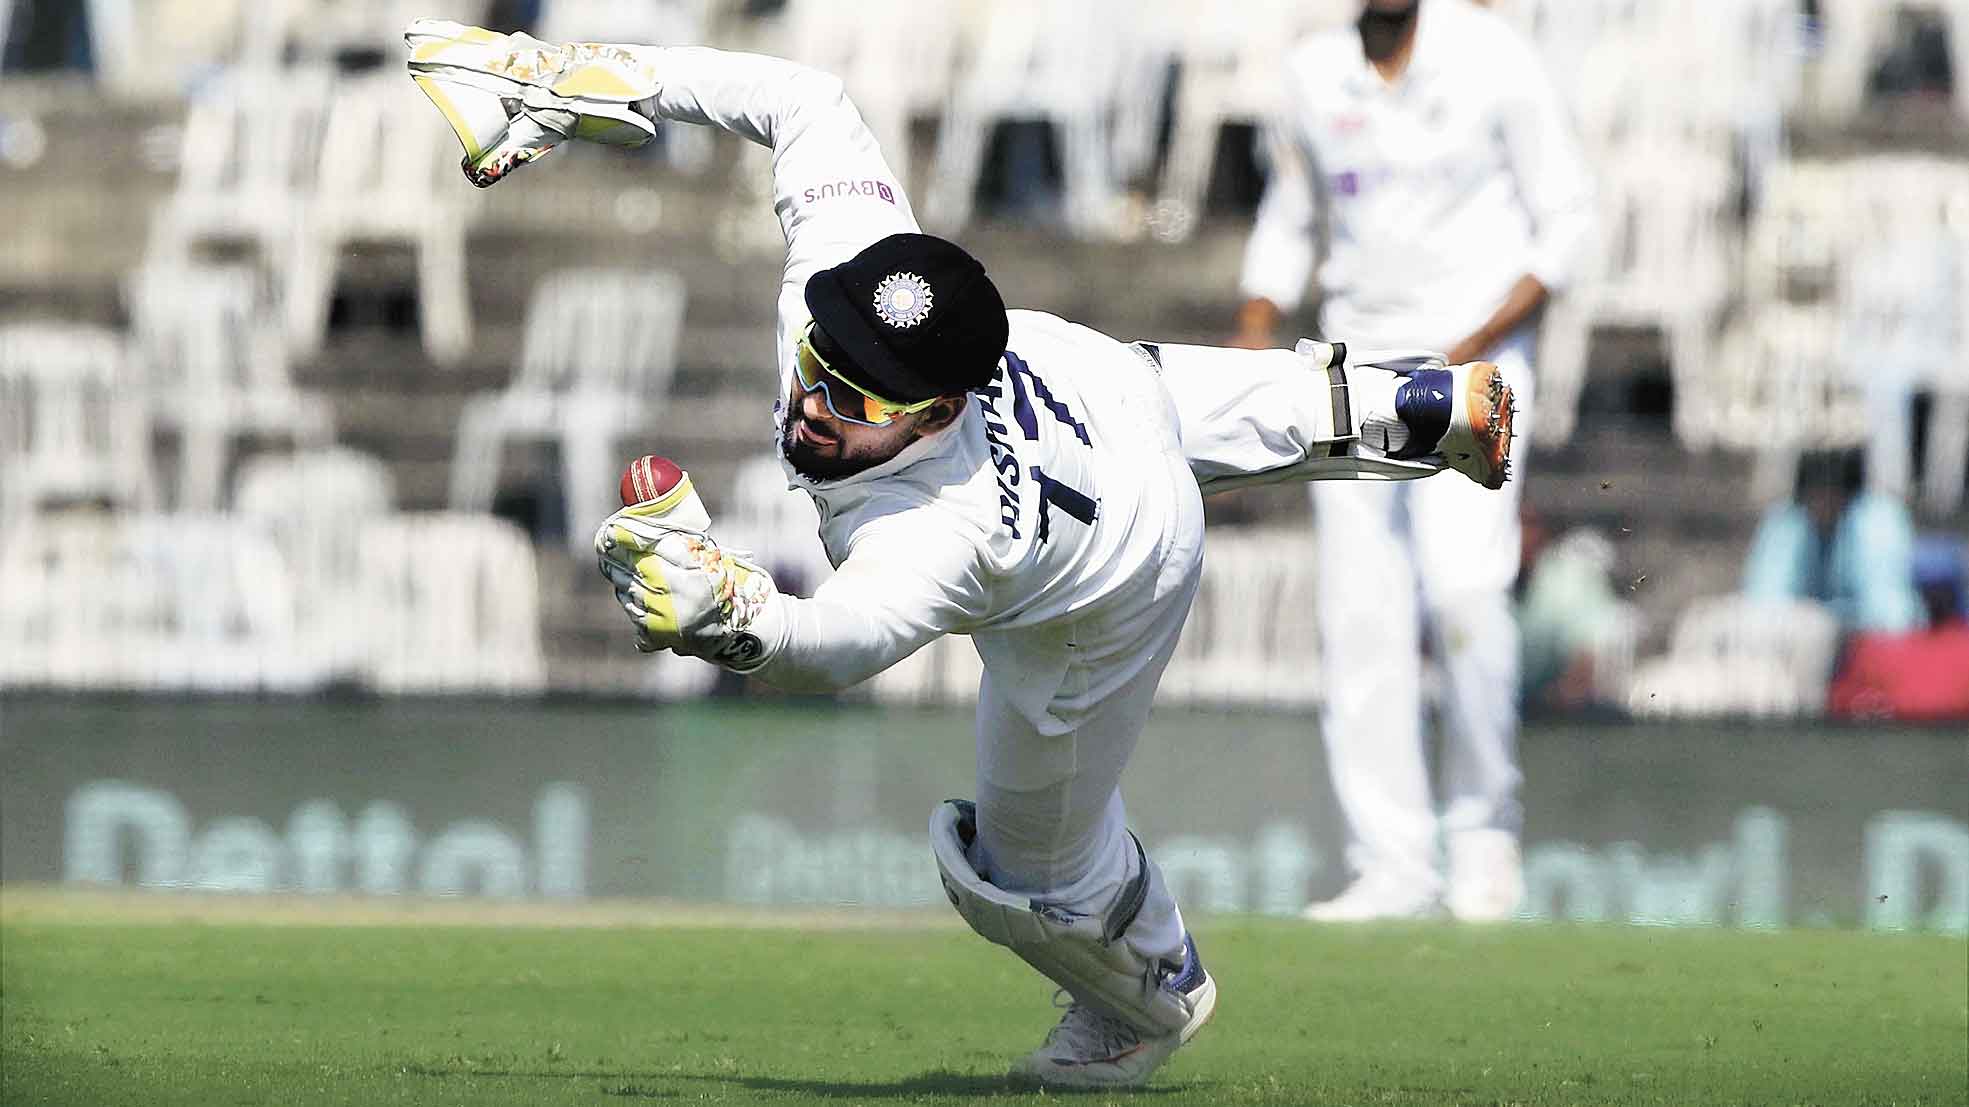 FLYING MACHINE: Rishabh Pant takes a diving catch to dismiss Ollie Pope on the second day of the second Test on Sunday.